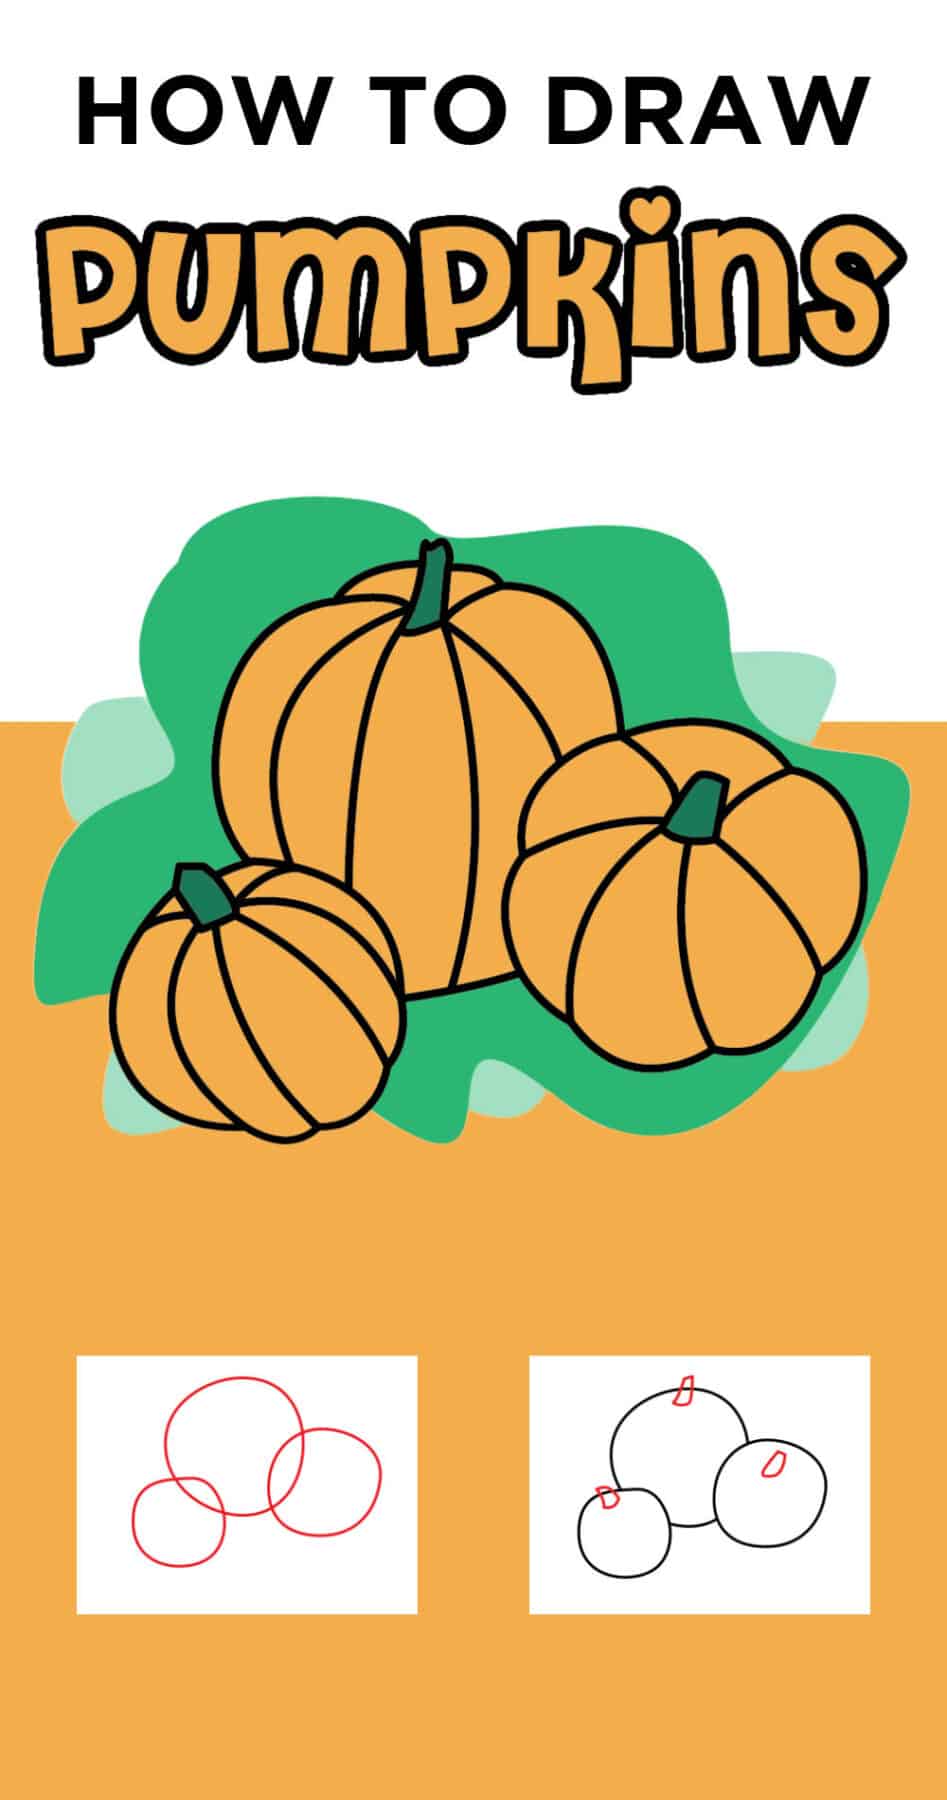 How to draw an easy pumpkin